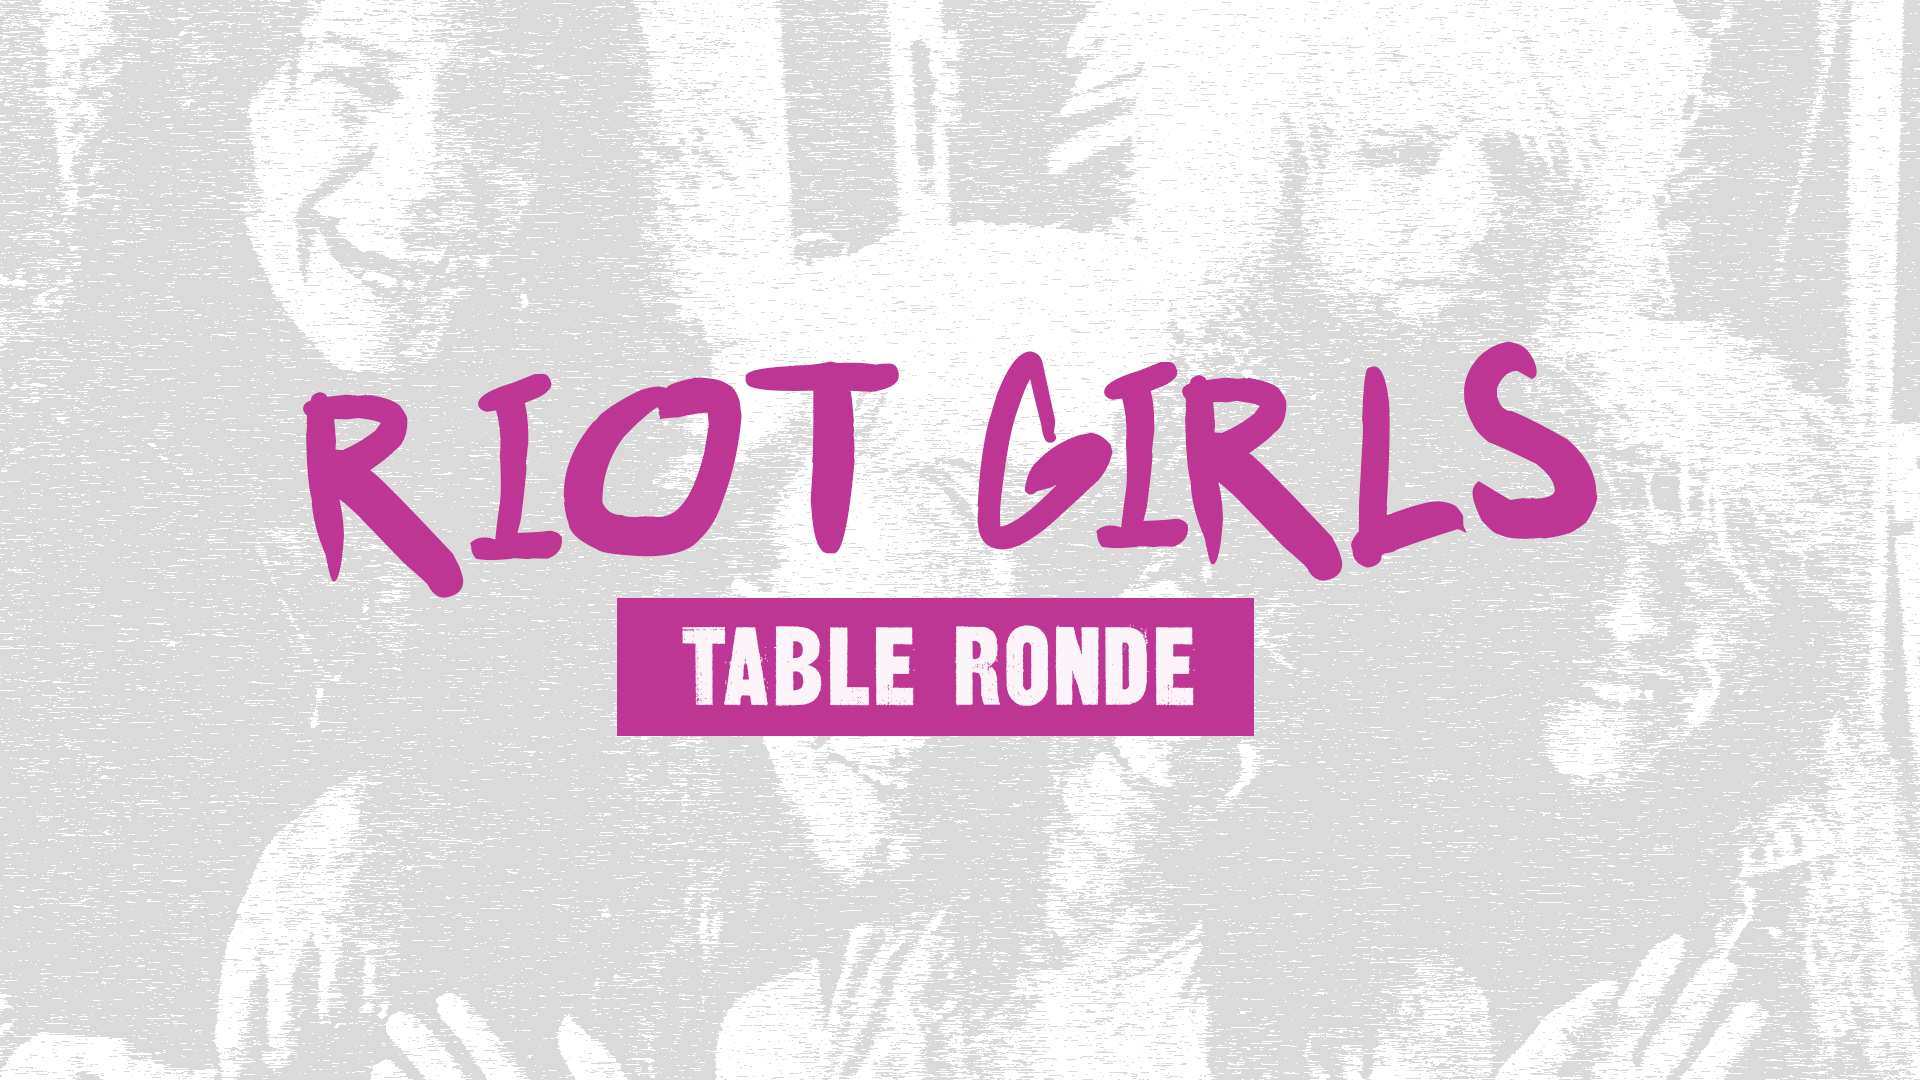 Table ronde • Riot Girls